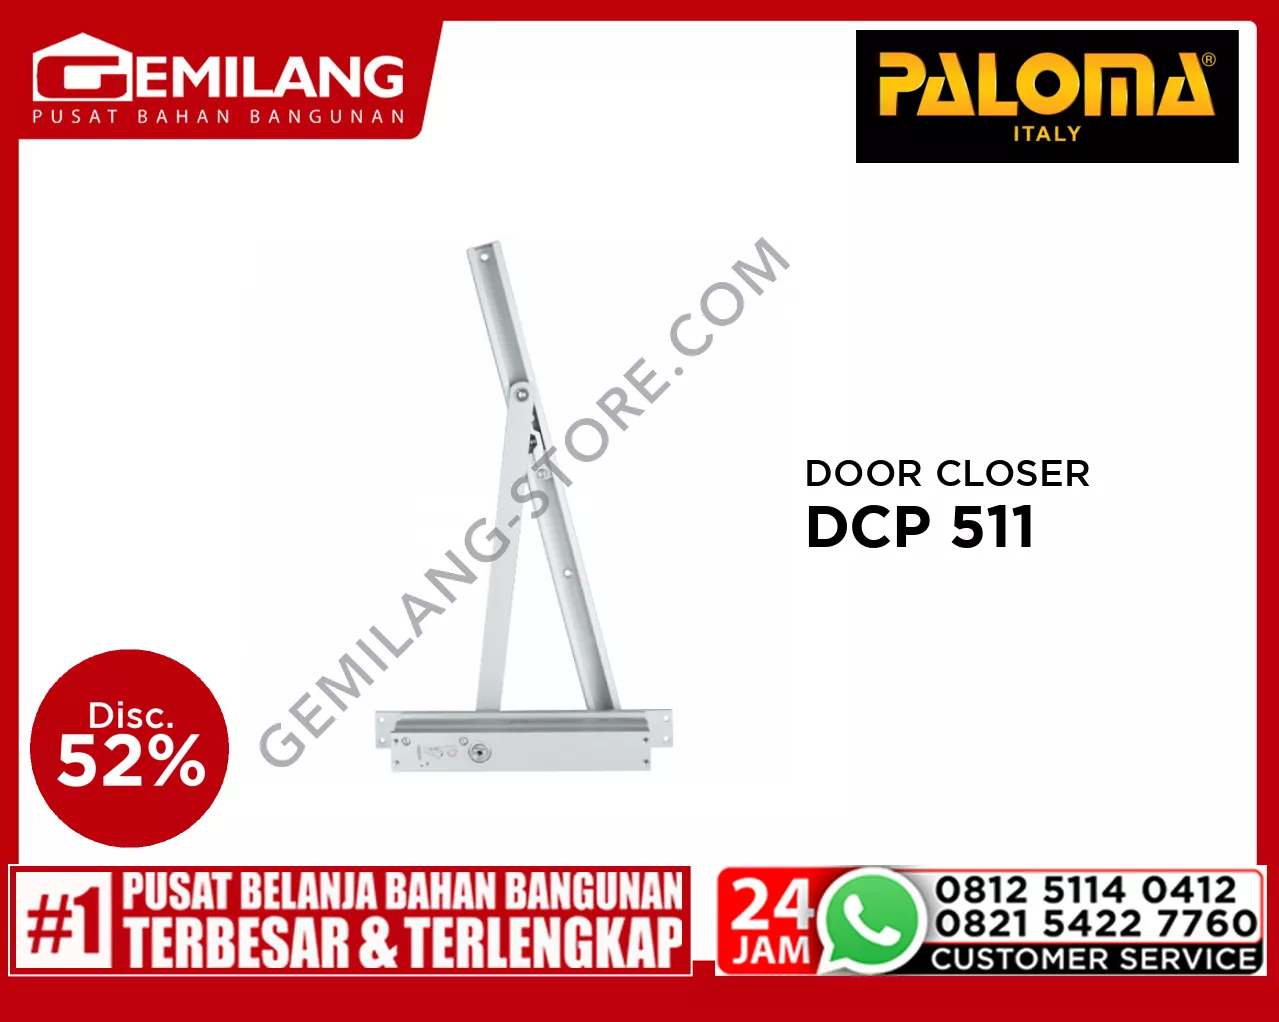 PALOMA DOOR CLOSER 992 CONCEALED FINISH NA DCP 511